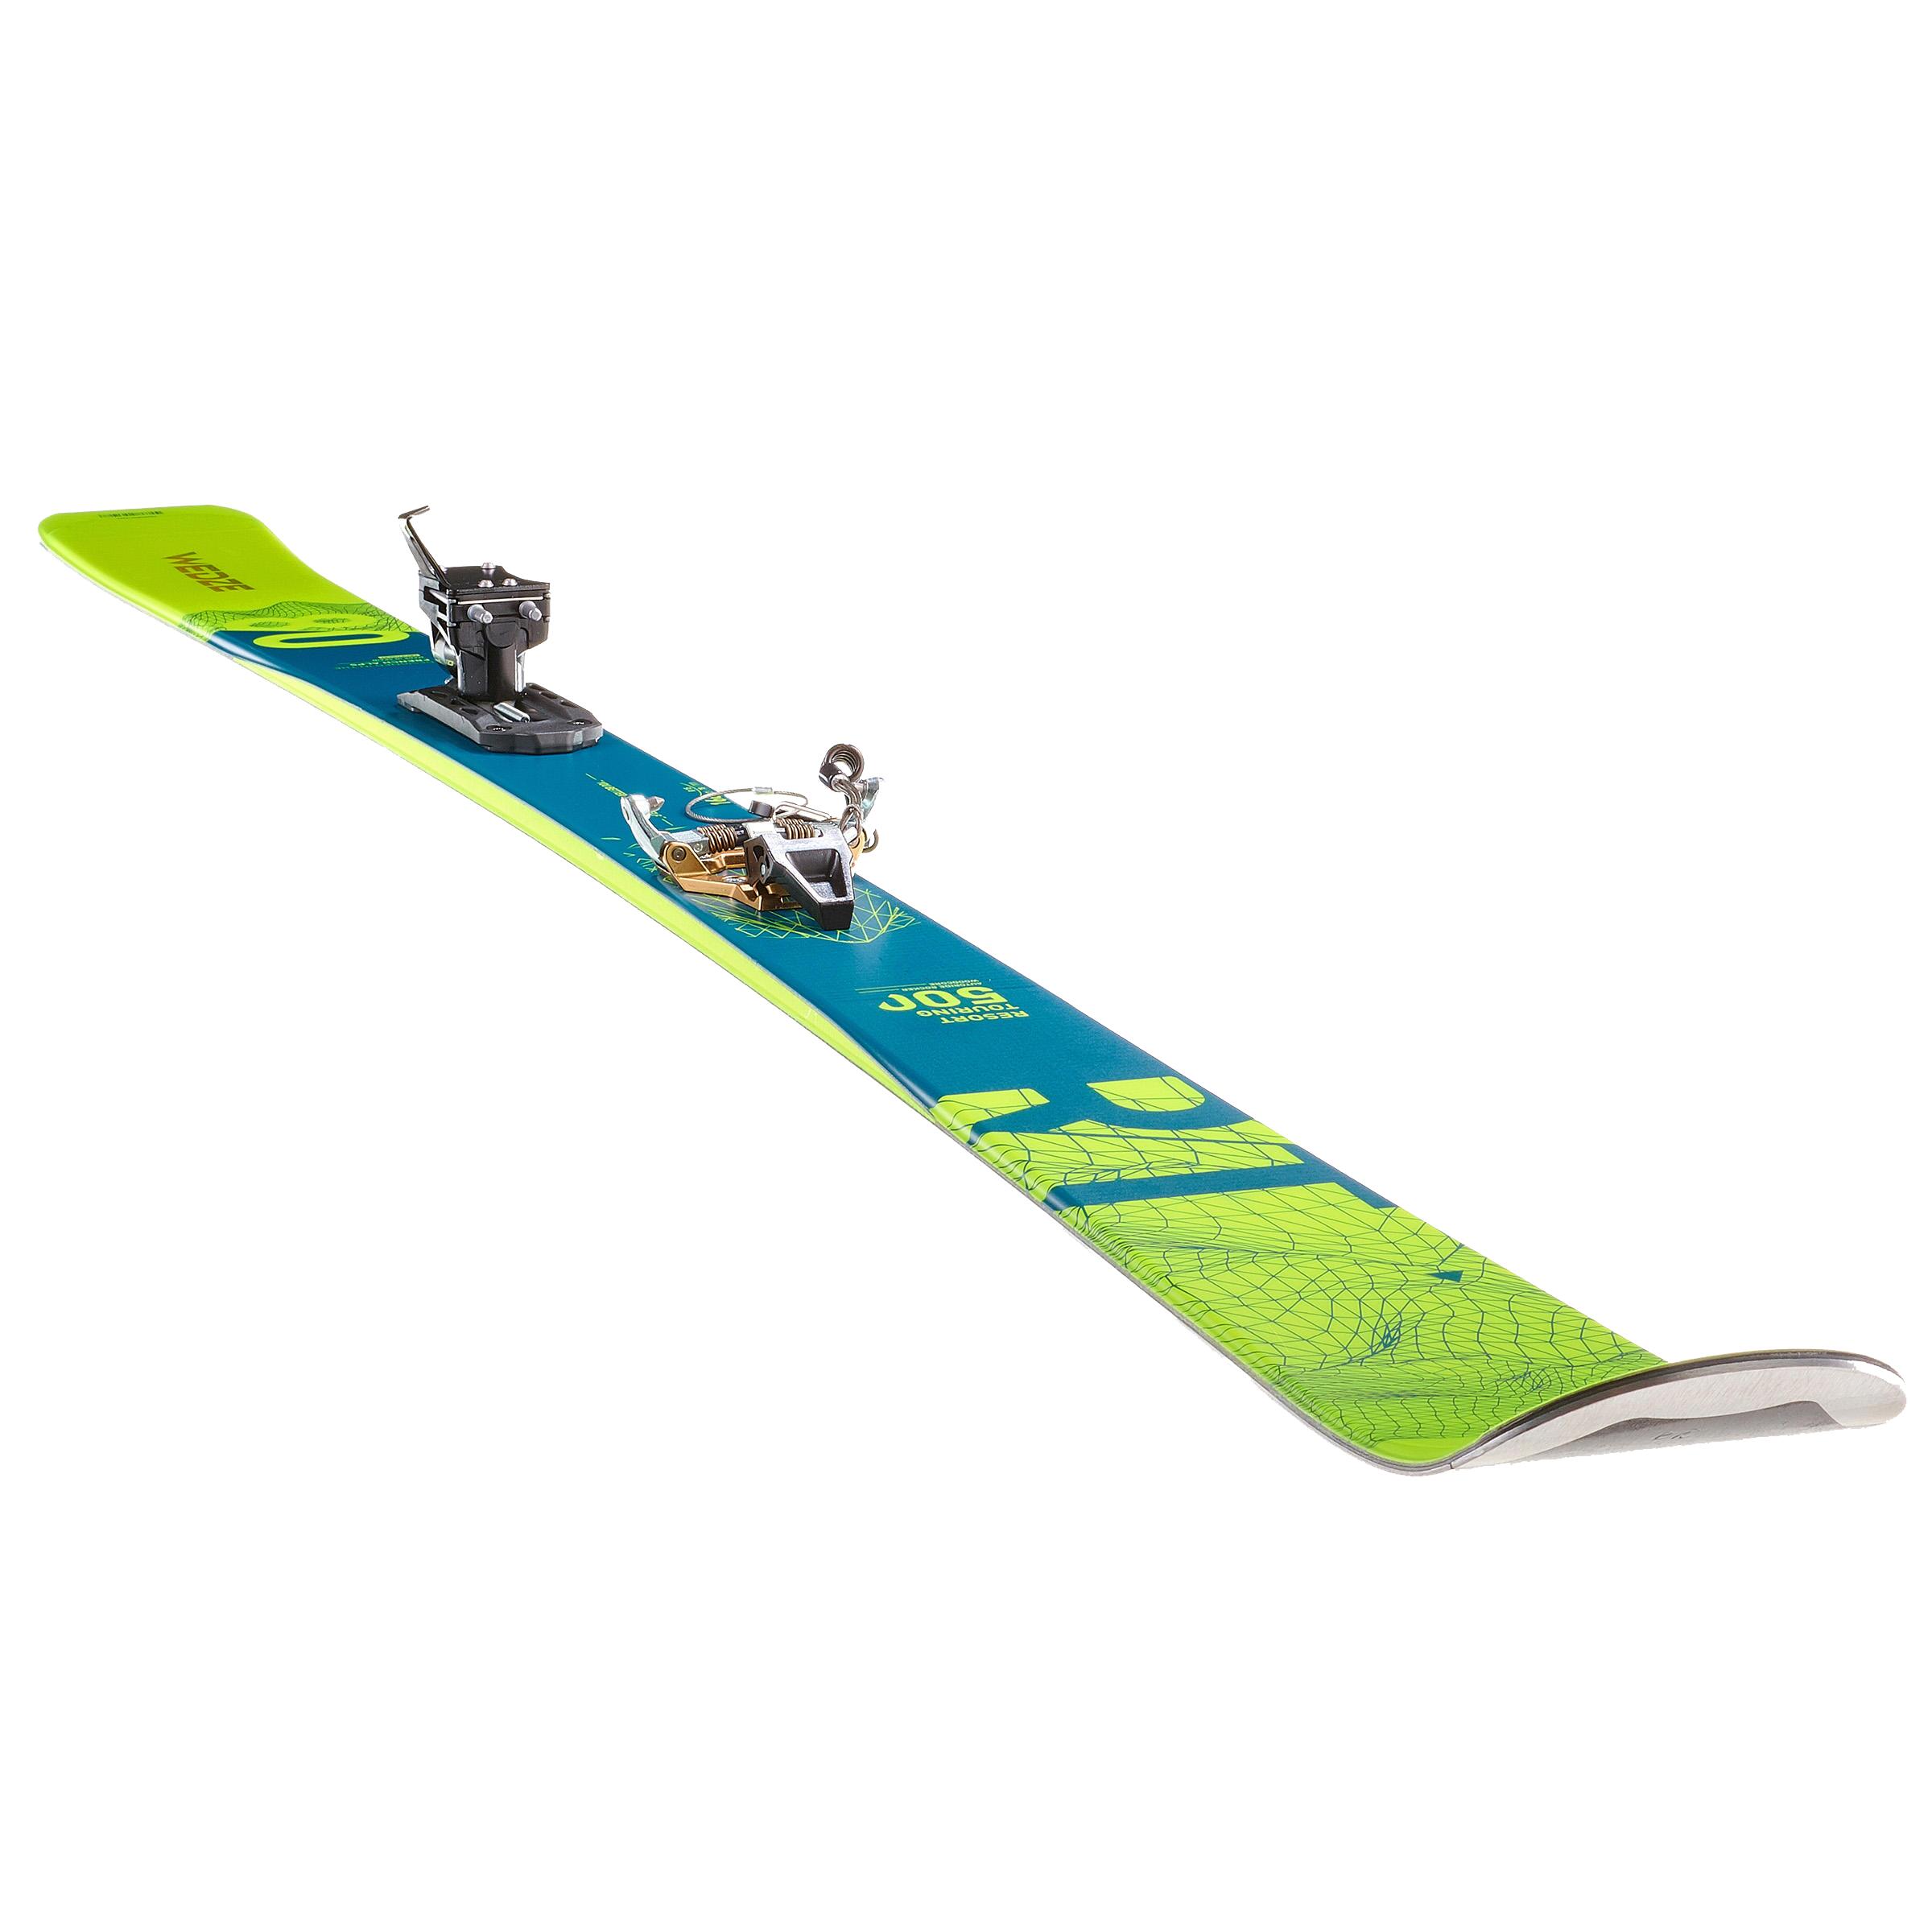 Touring Skis with Bindings and Skins - RT 500 - WEDZE